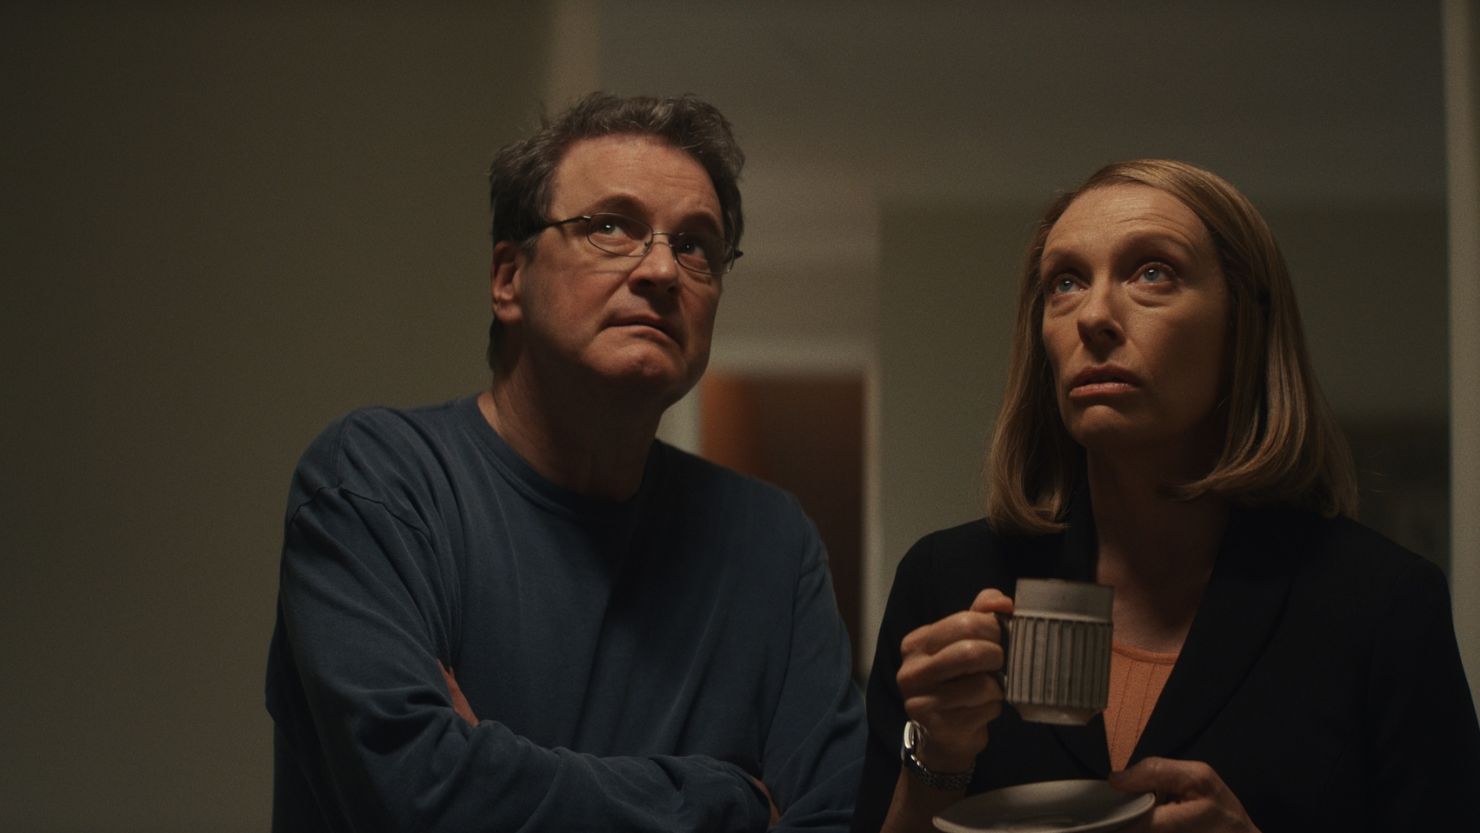 Colin Firth and Toni Collette in "The Staircase" on HBO Max. 